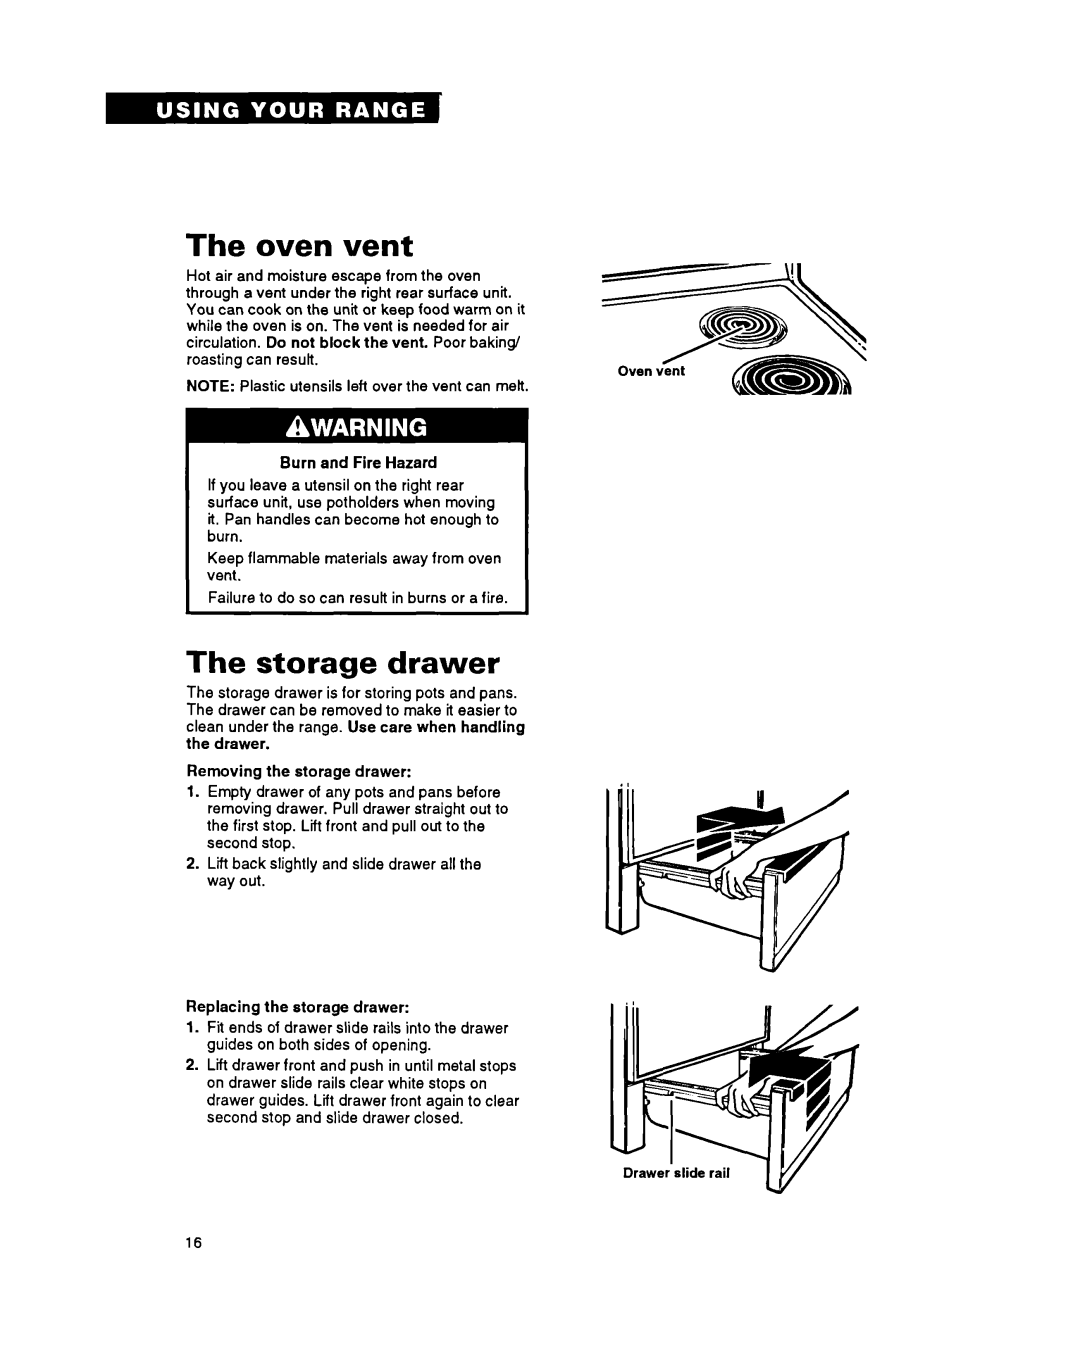 Whirlpool FEP340Y important safety instructions =Y$, The oven vent, The storage drawer 